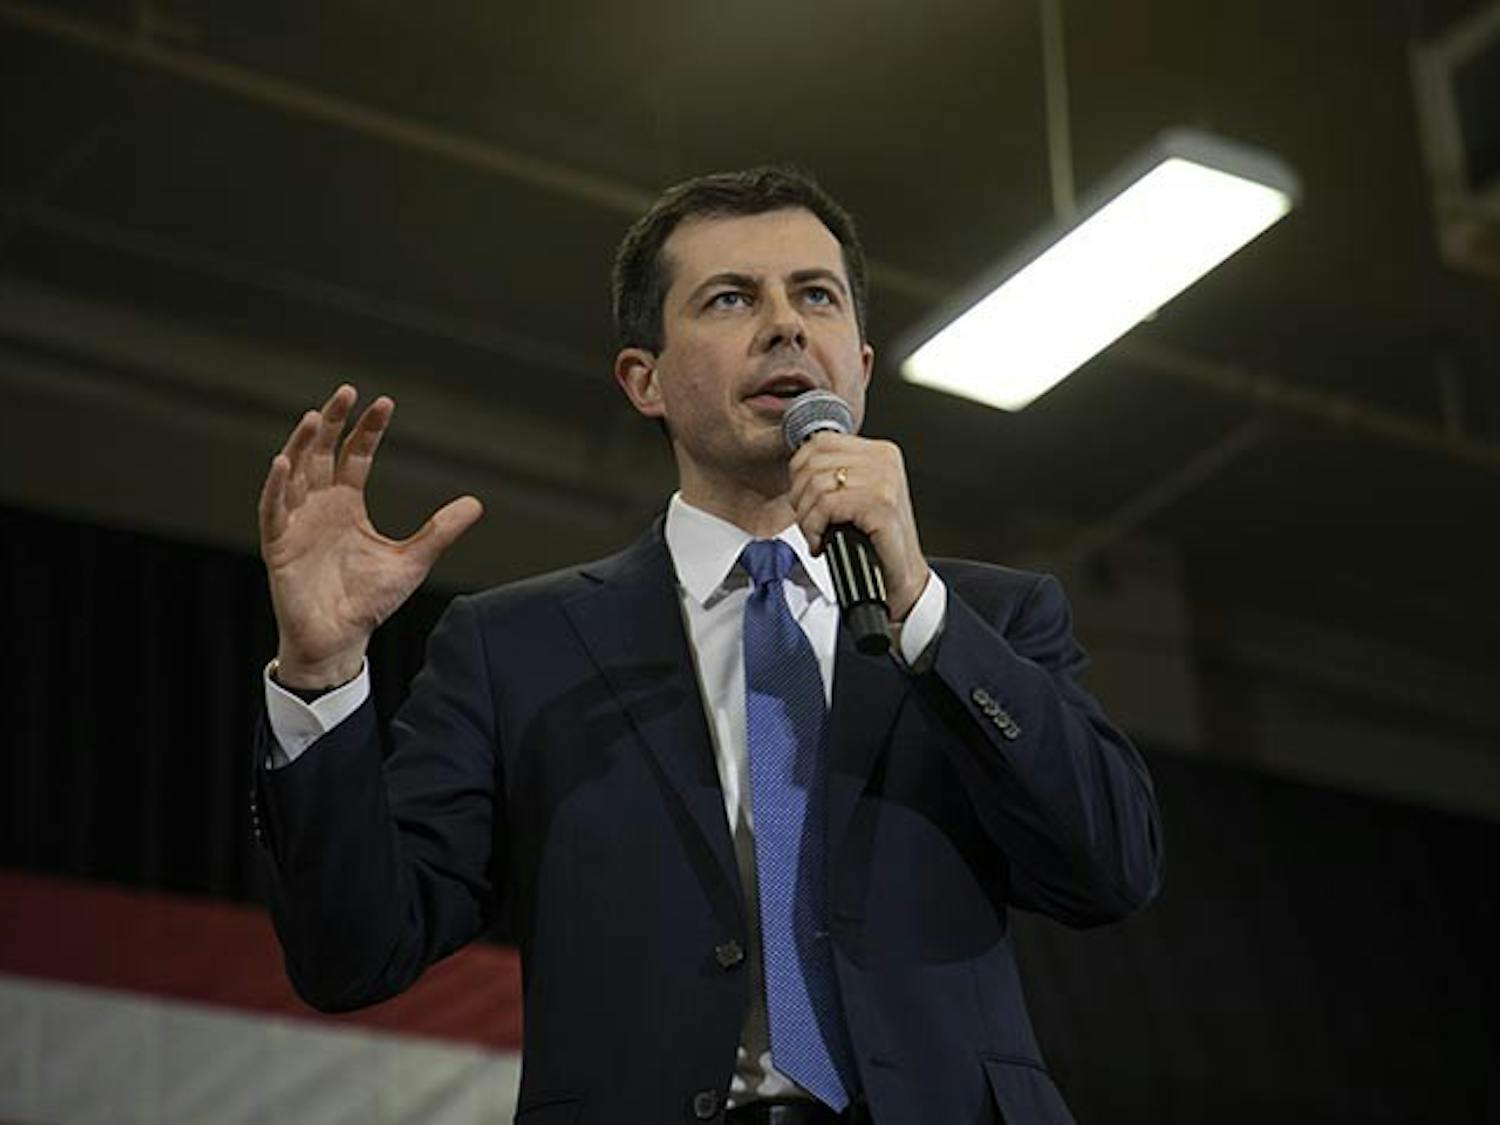 Democratic candidate Pete Buttegieg speaks to the attendees at the Get Out the Vote town hall style forum at a Seven Oaks Park the day before the primaries. Buttigieg answered many questions asked by the forums attendees.&nbsp;